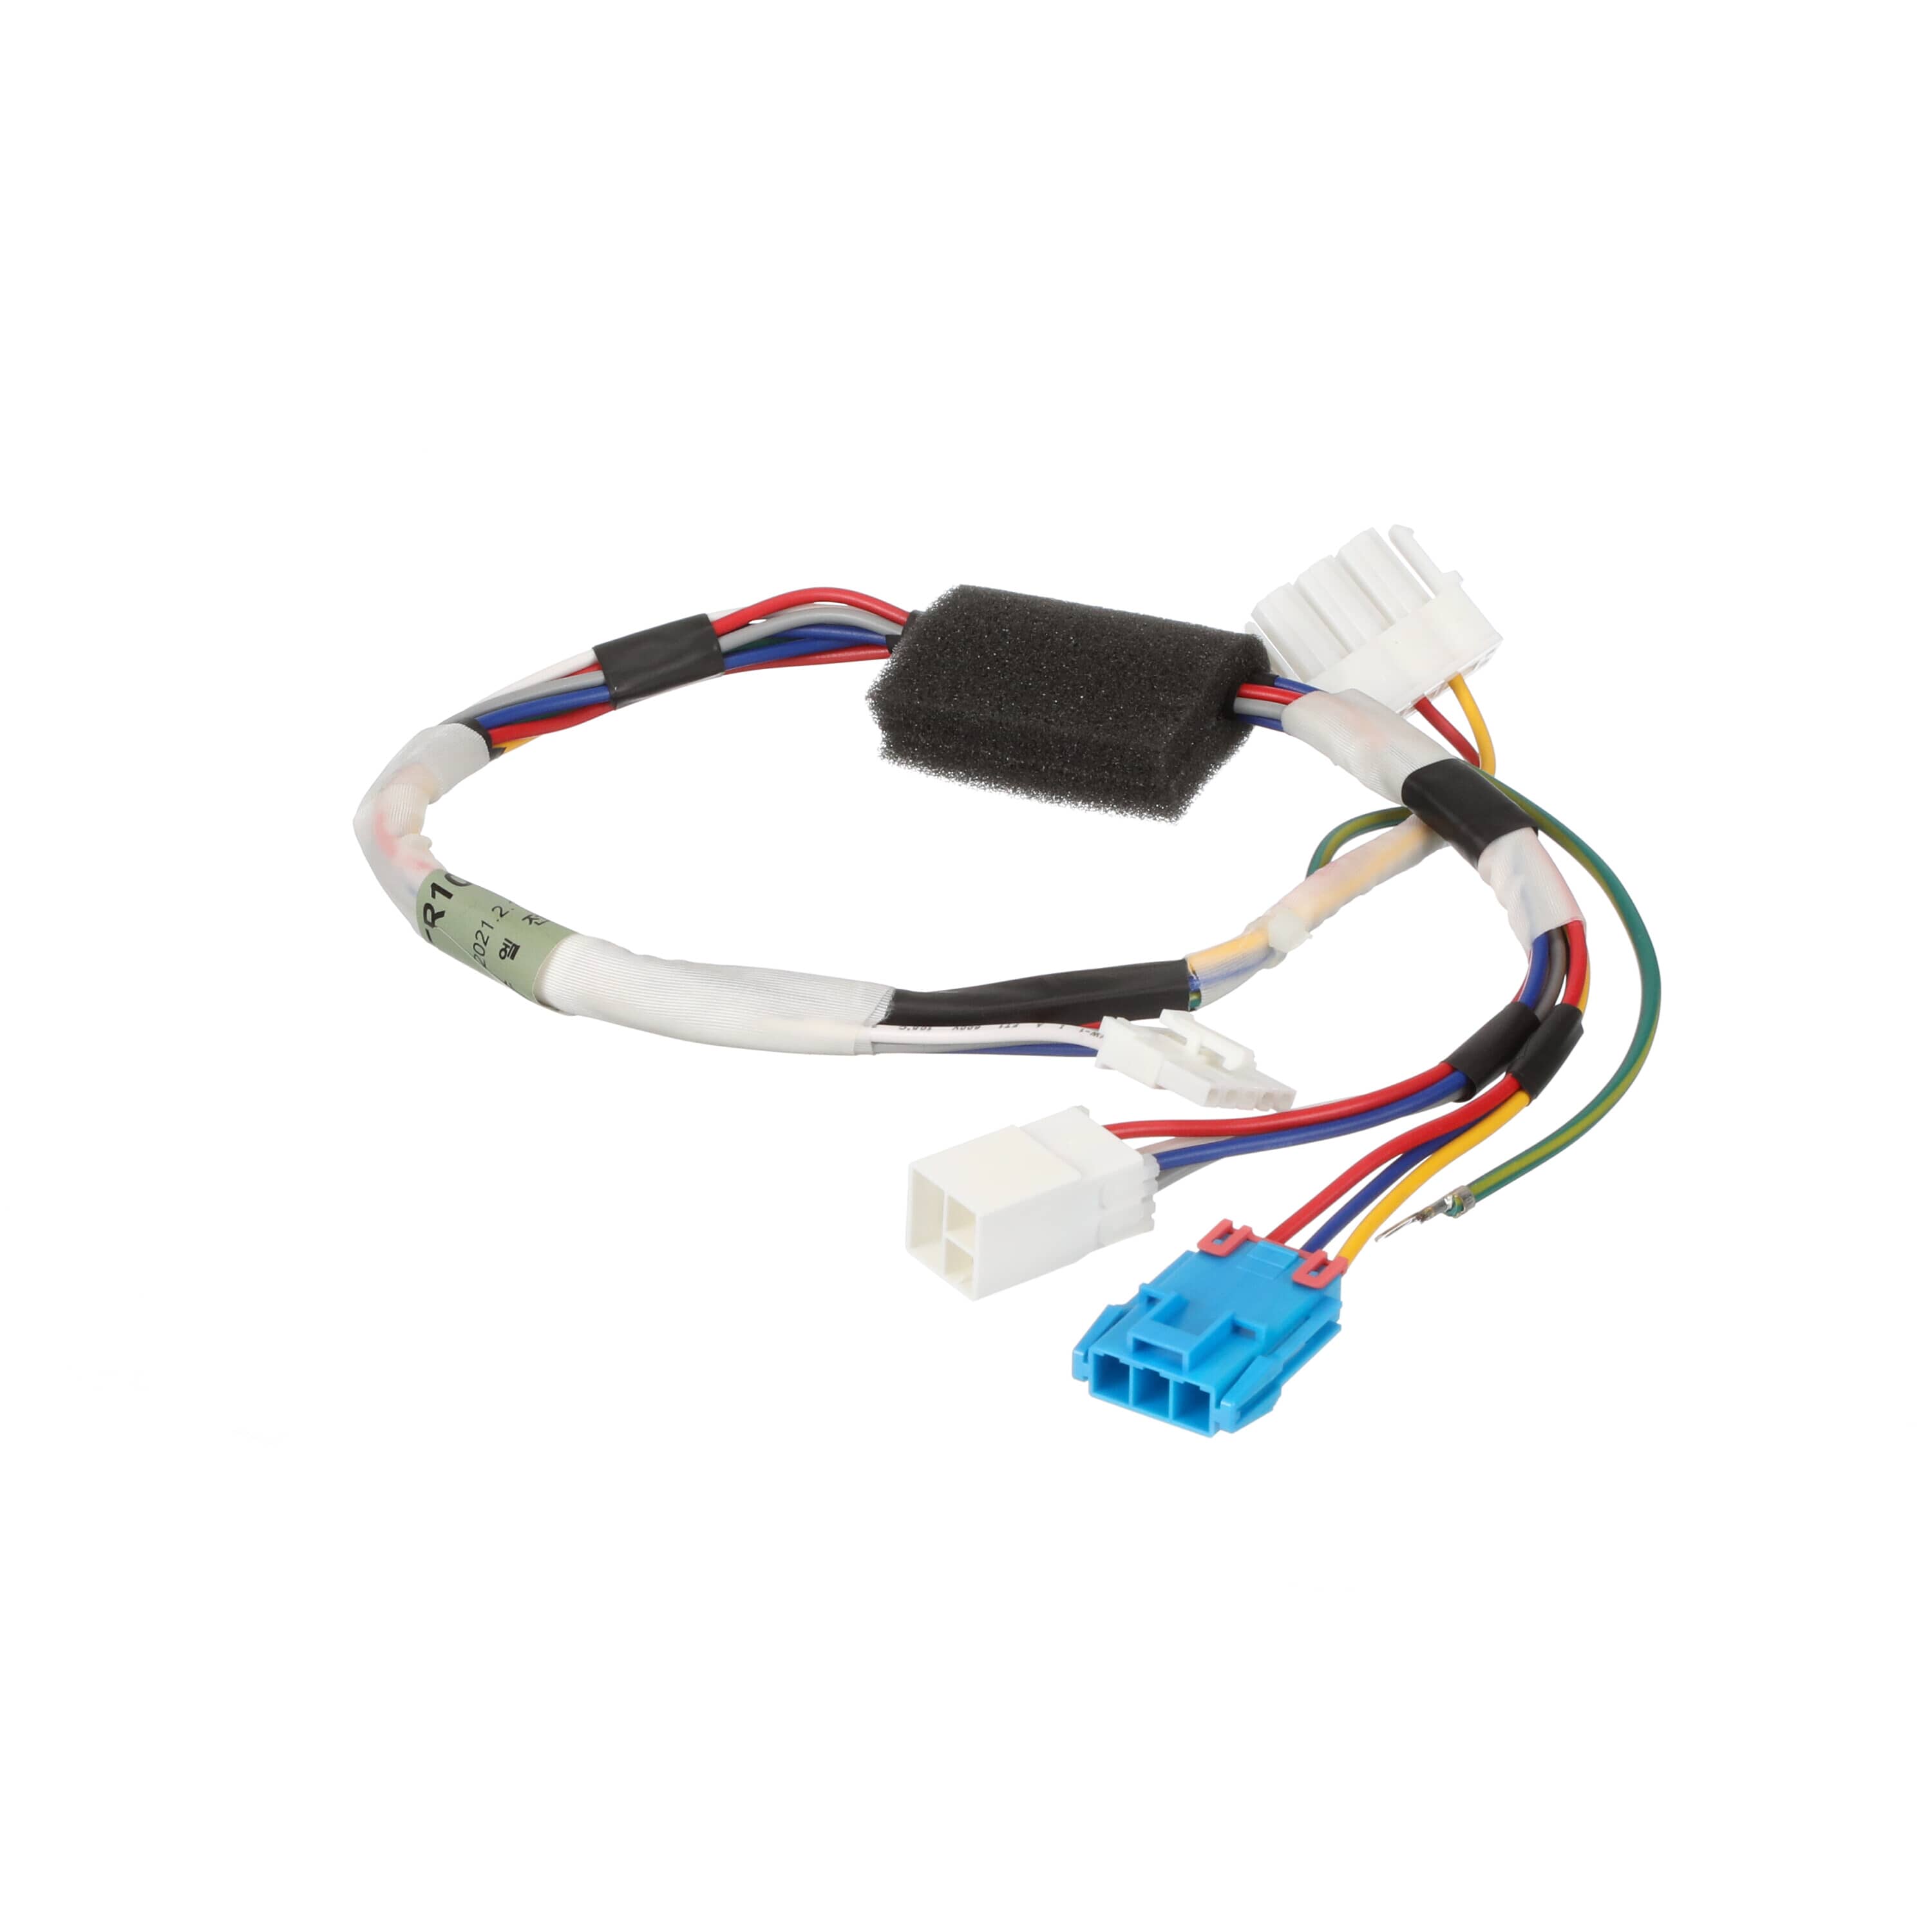 LG 6877ER1016H Washer Multi Wire Harness